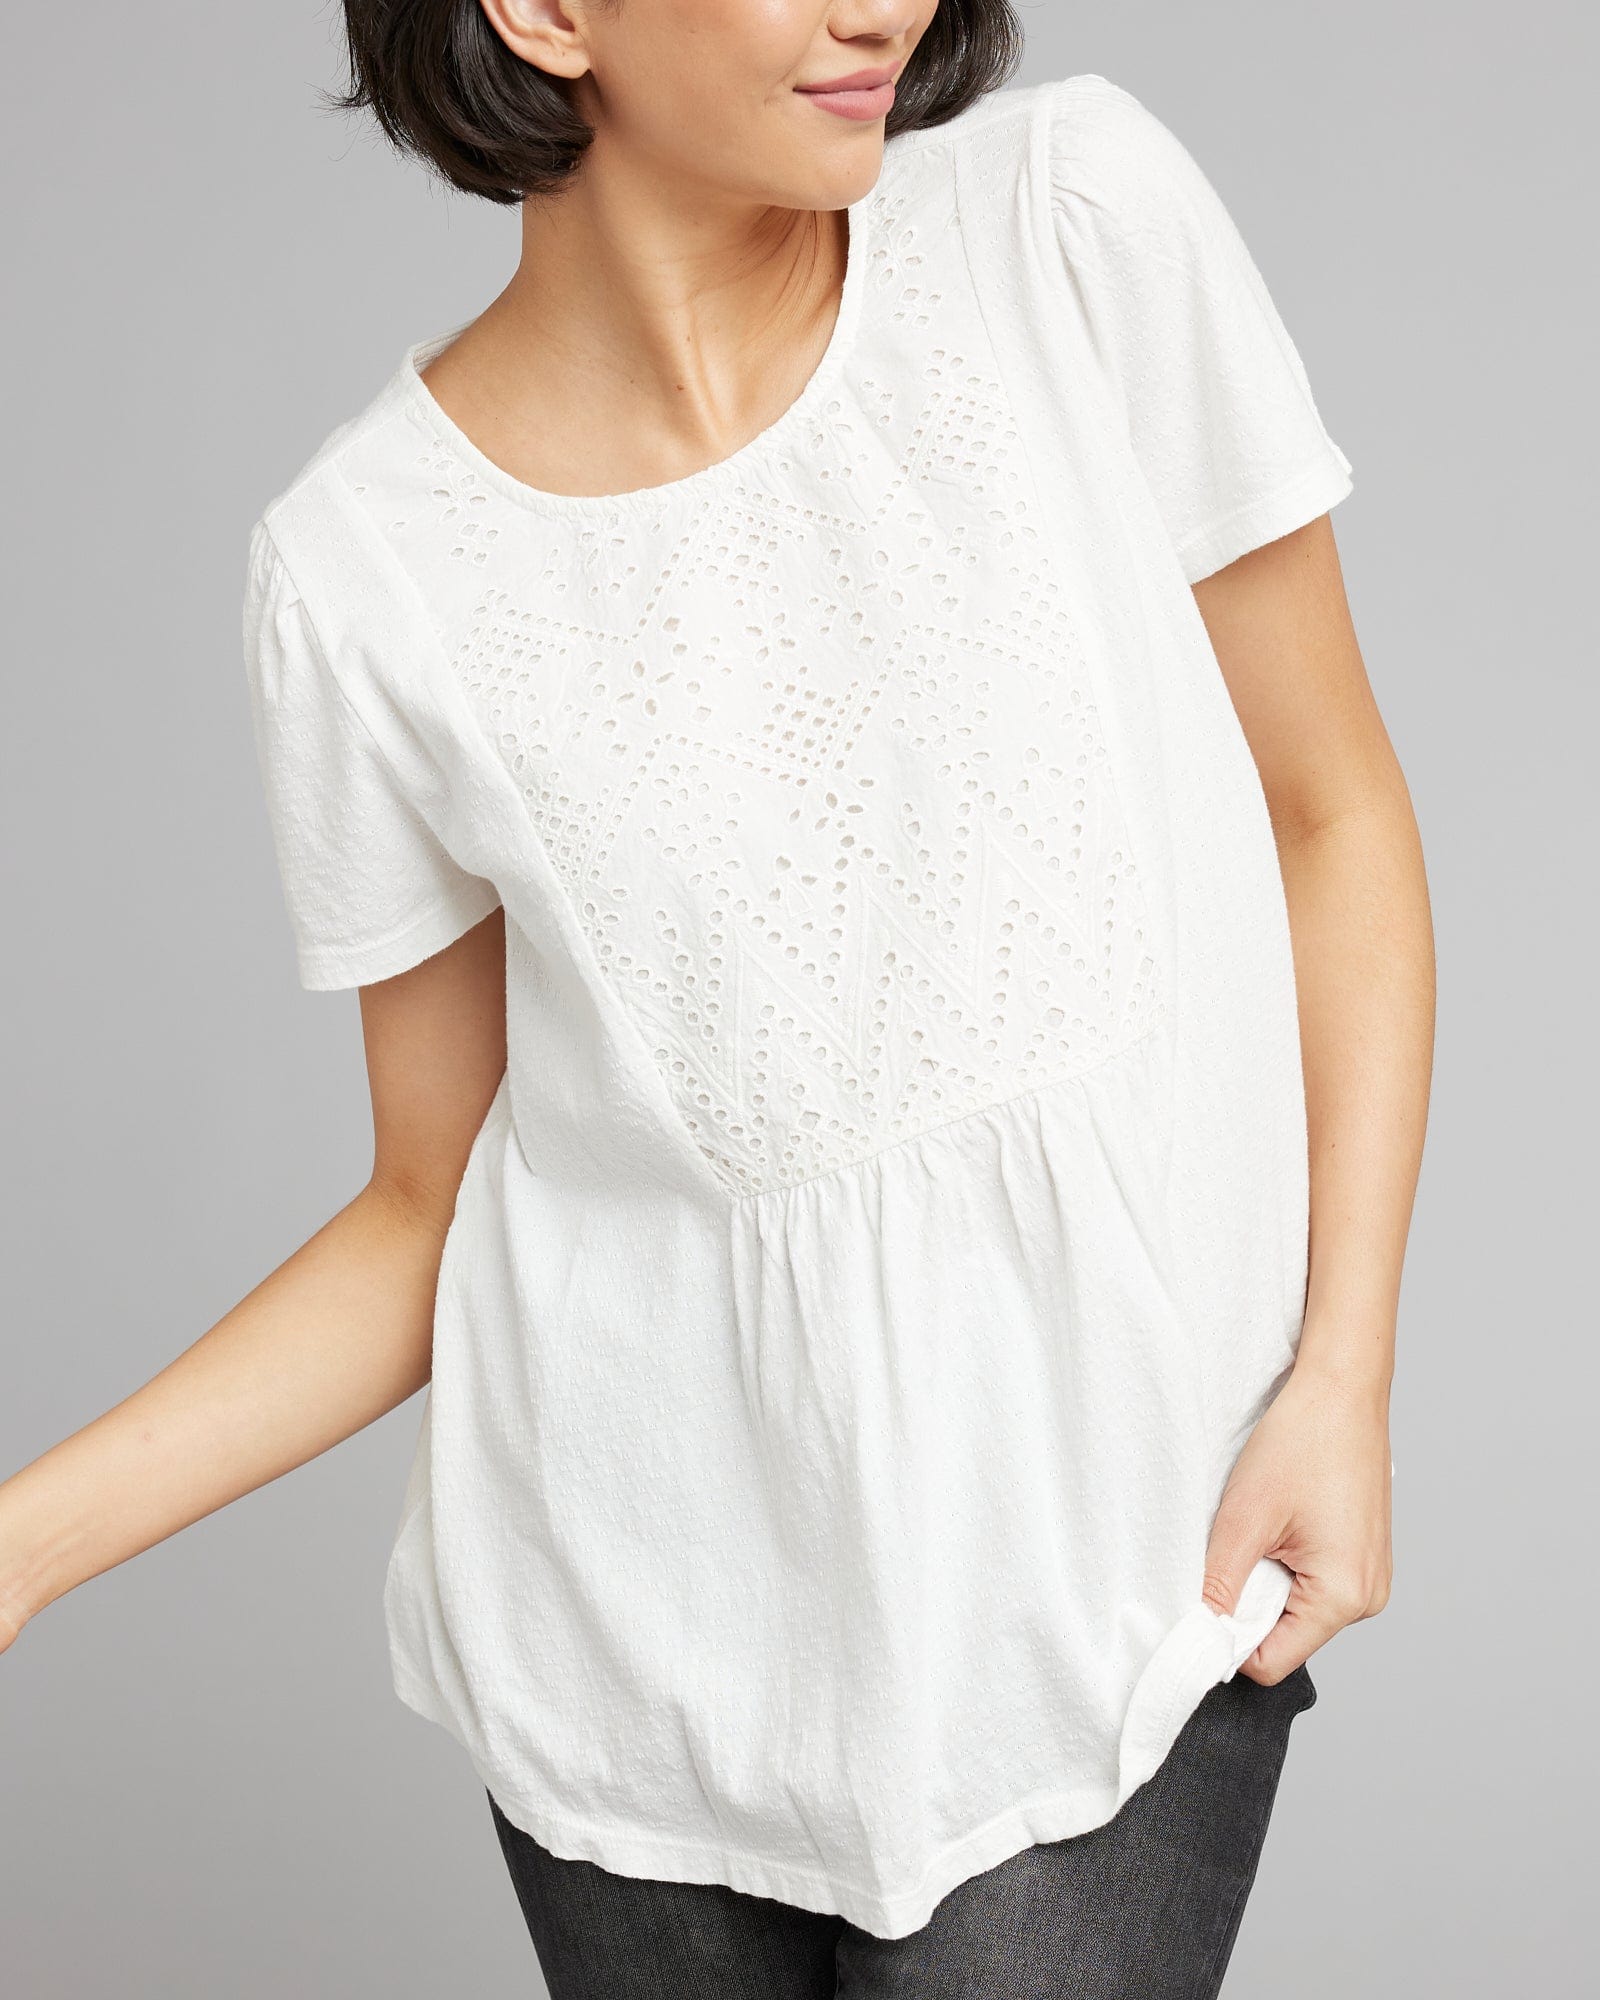 Woman in a white, short sleeved, top with eyelet motif on front